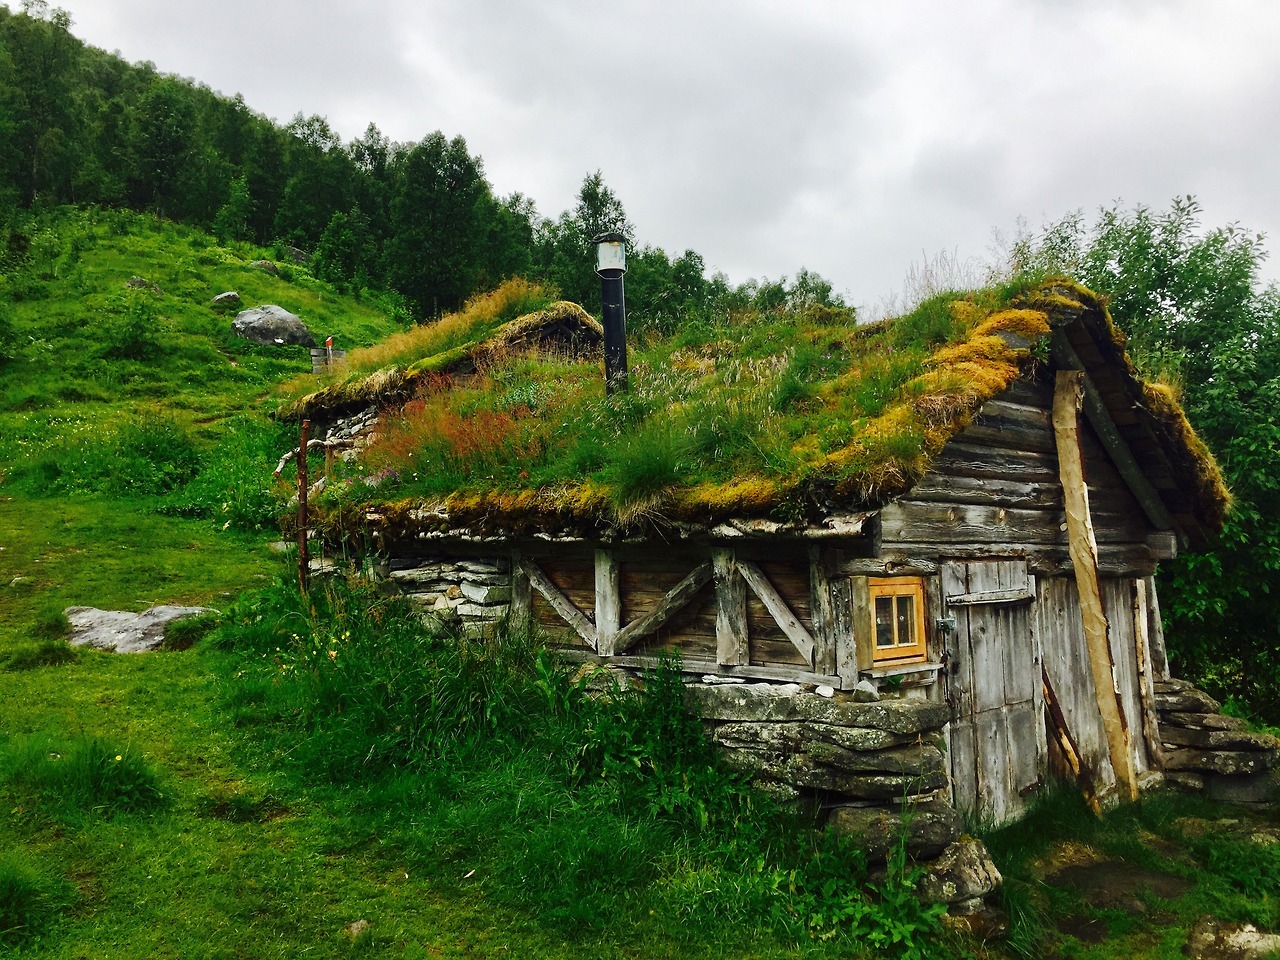 Sunken cabin in Homlongsætra, Norway
Submitted by Joseph Johnston
“I took this photo on a Geiranger Fjord hike in Norway. We took a Fjord cruise that dropped us off at the trail on the way back. We hiked up the cliff to a couple farms at Skageflå and...